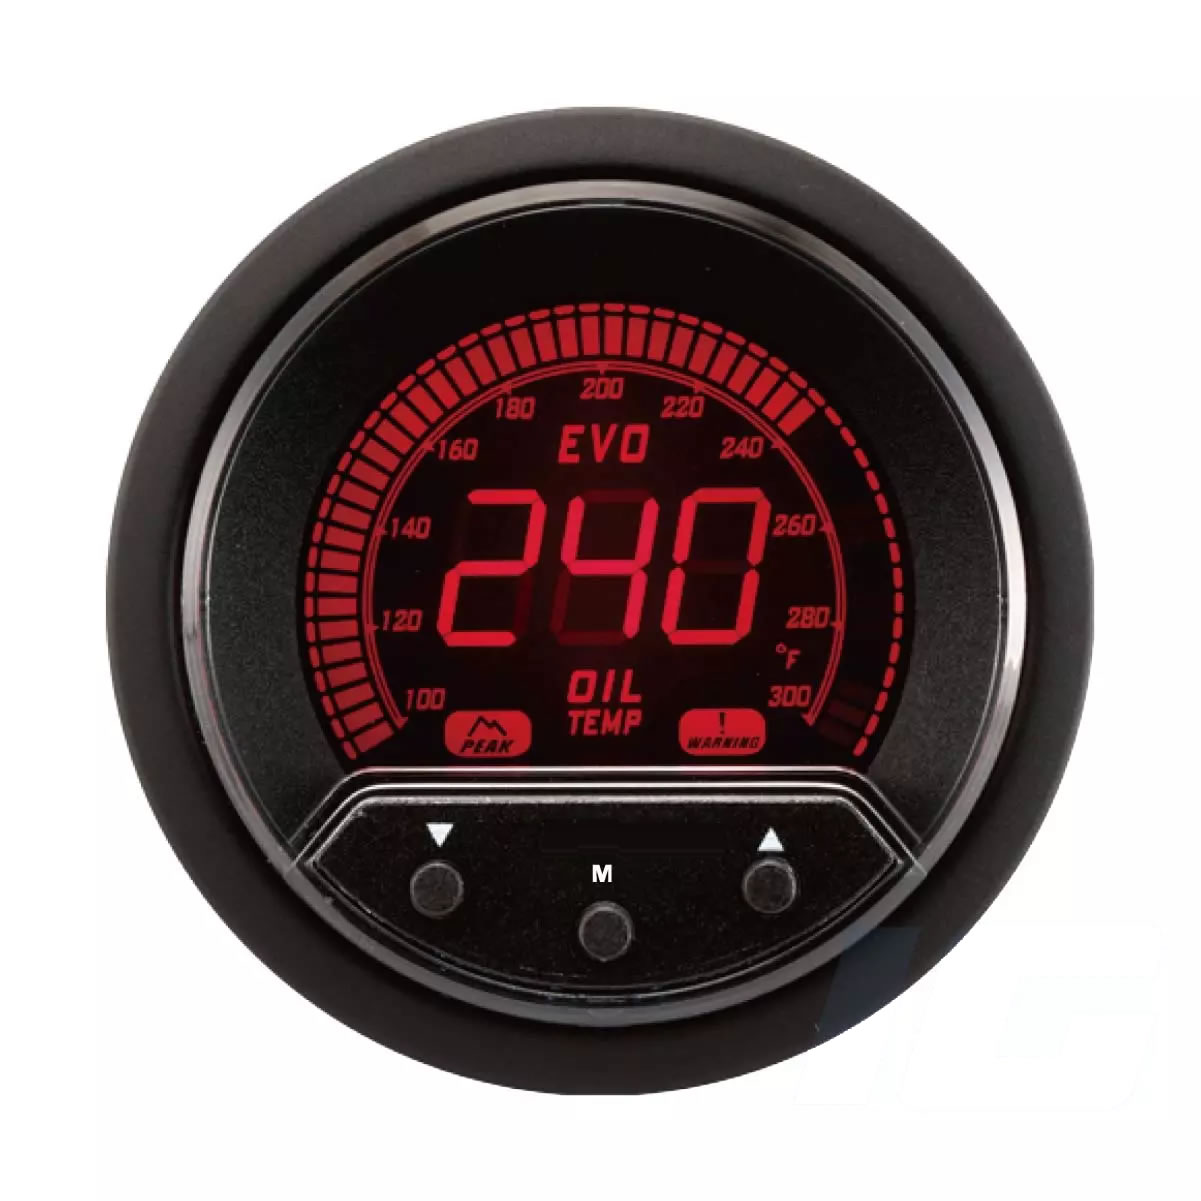 52mm LCD Performance Car Gauges - Oil Temp Gauge With Sensor and Warning and Peak For Your Sport Racing Car